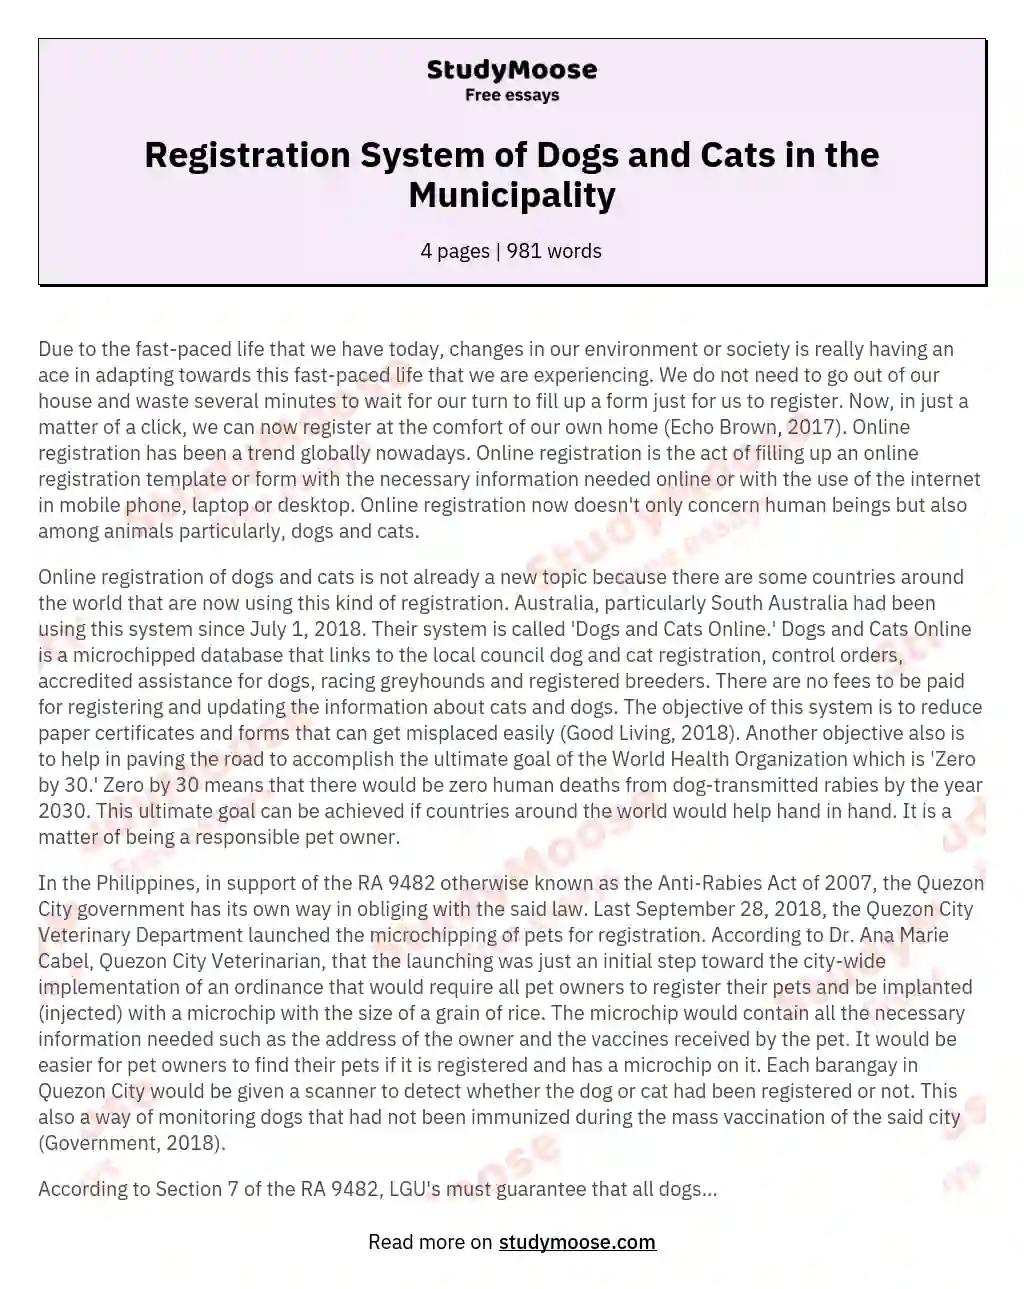 Registration System of Dogs and Cats in the Municipality essay